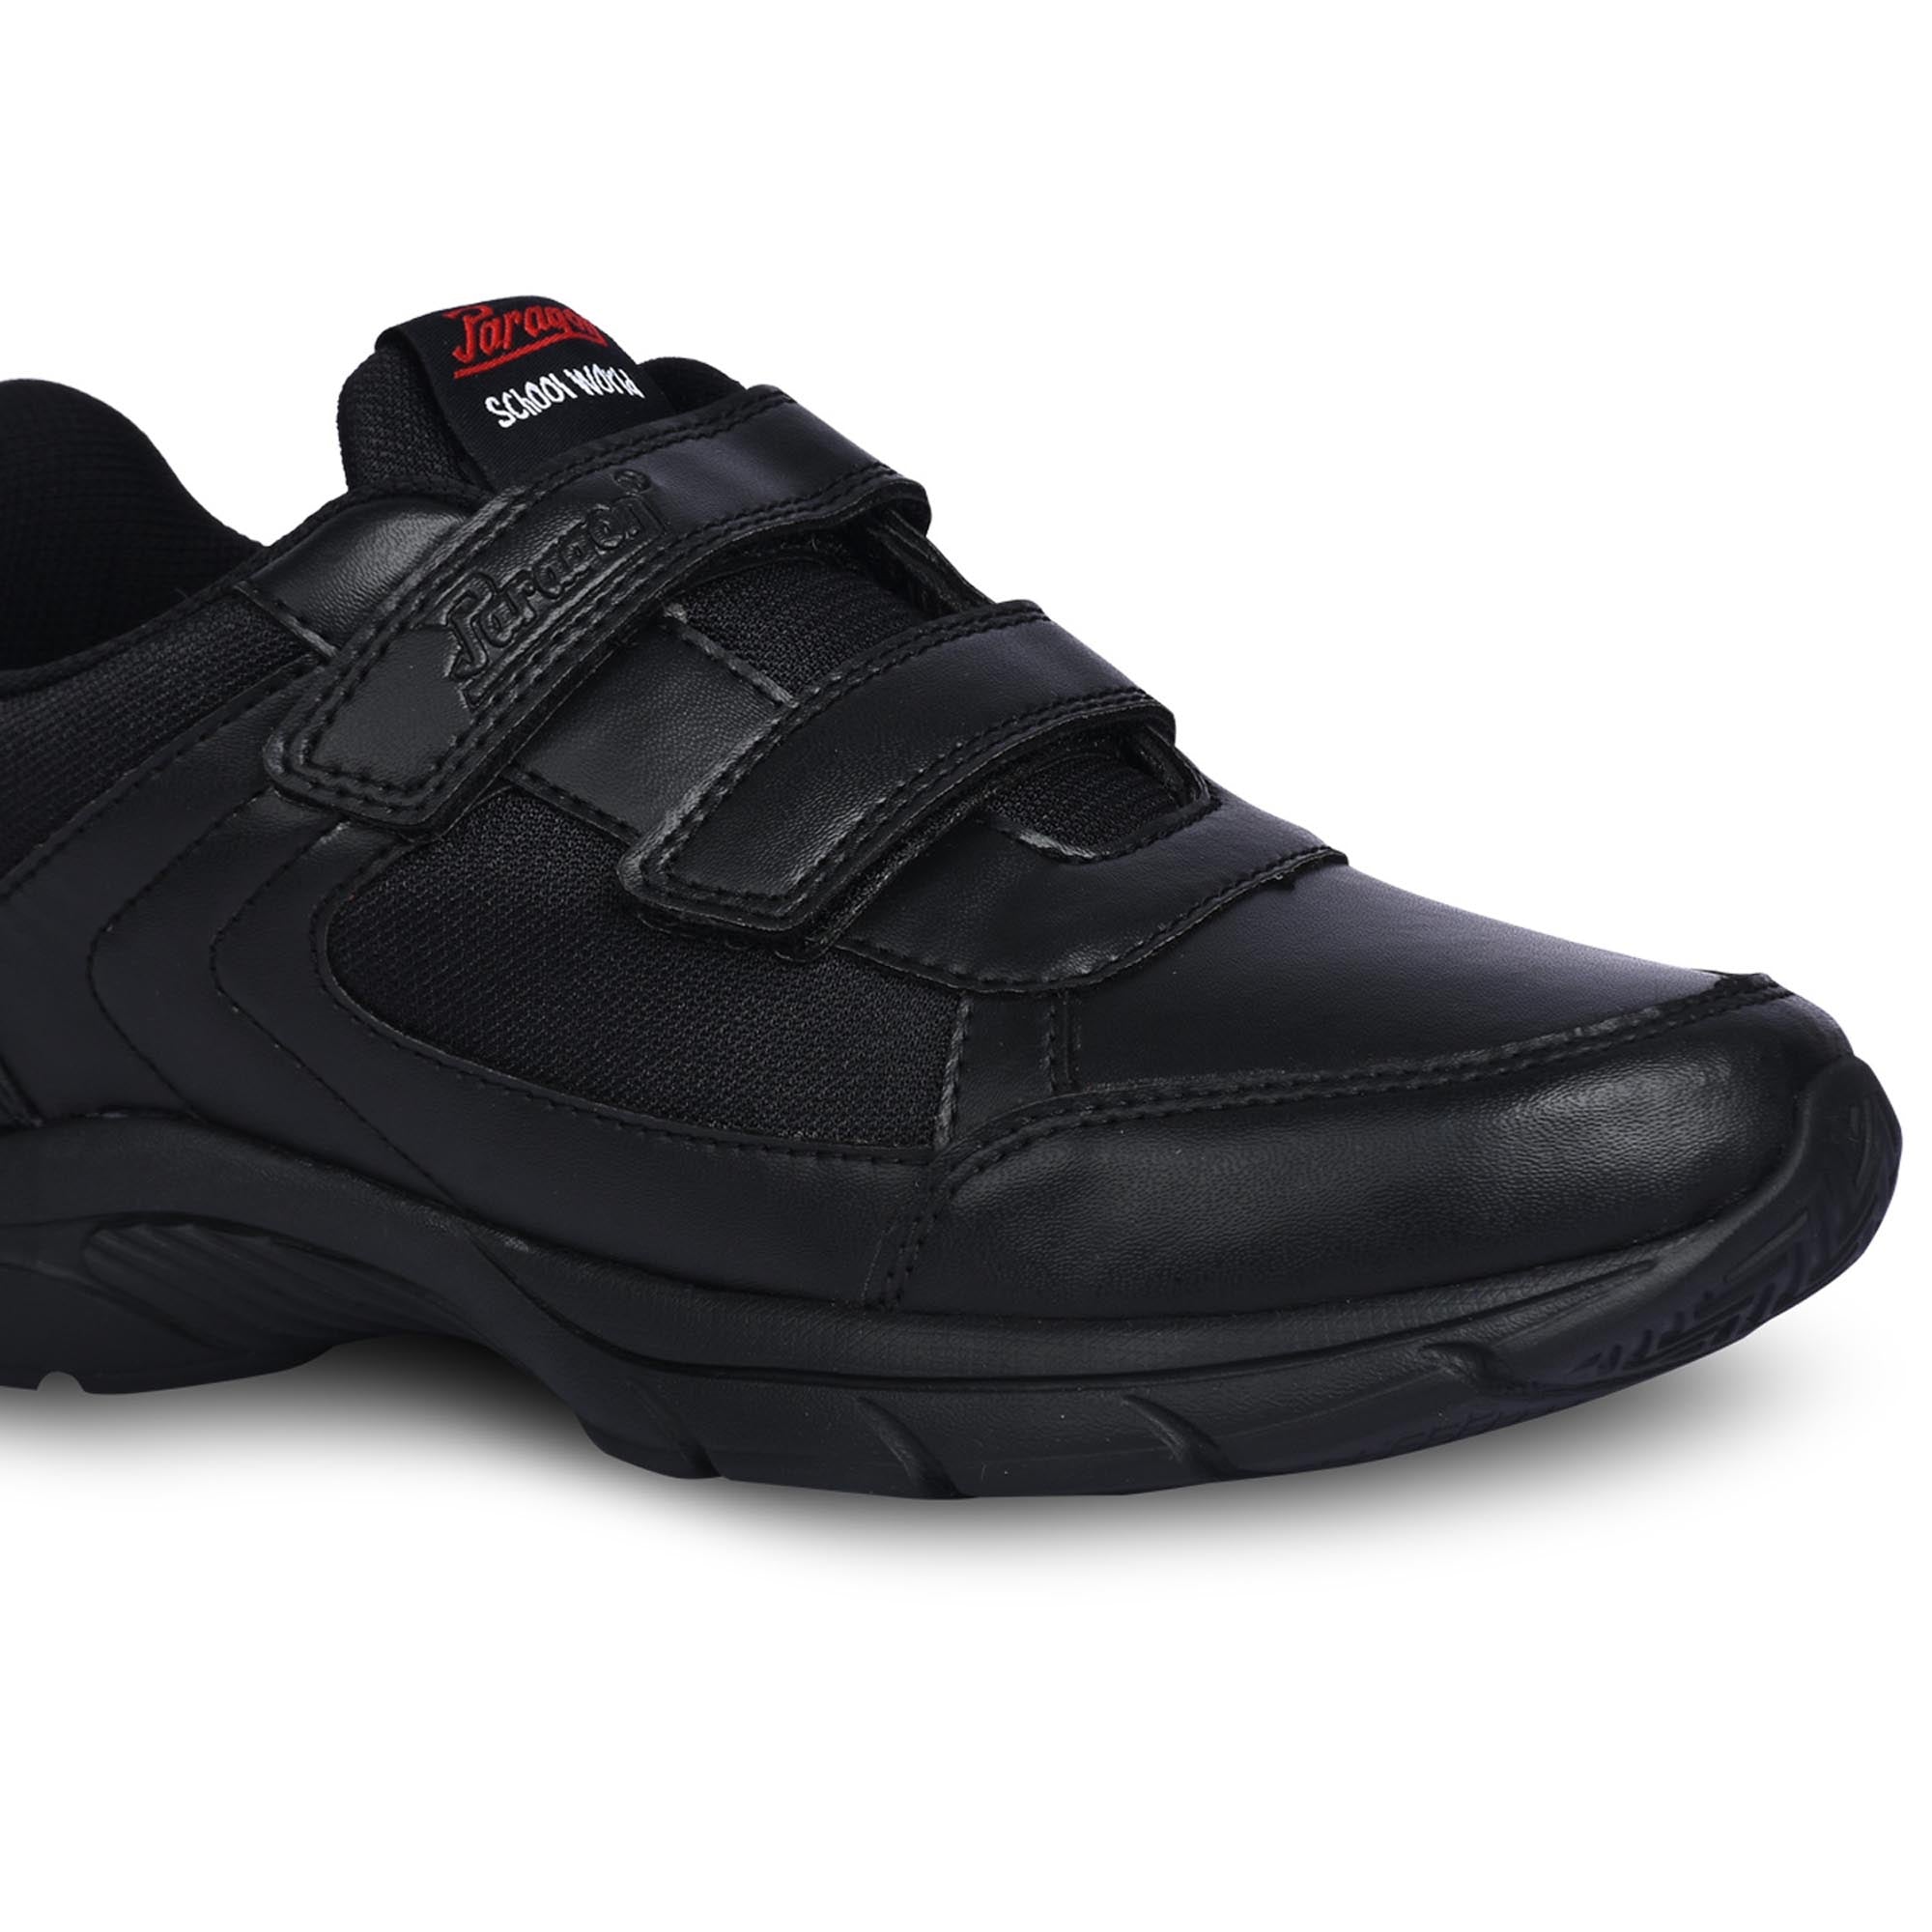 Paragon FBK0774B Kids Boys Girls School Shoes Comfortable Cushioned Soles | Durable | Daily &amp; Occasion wear Black